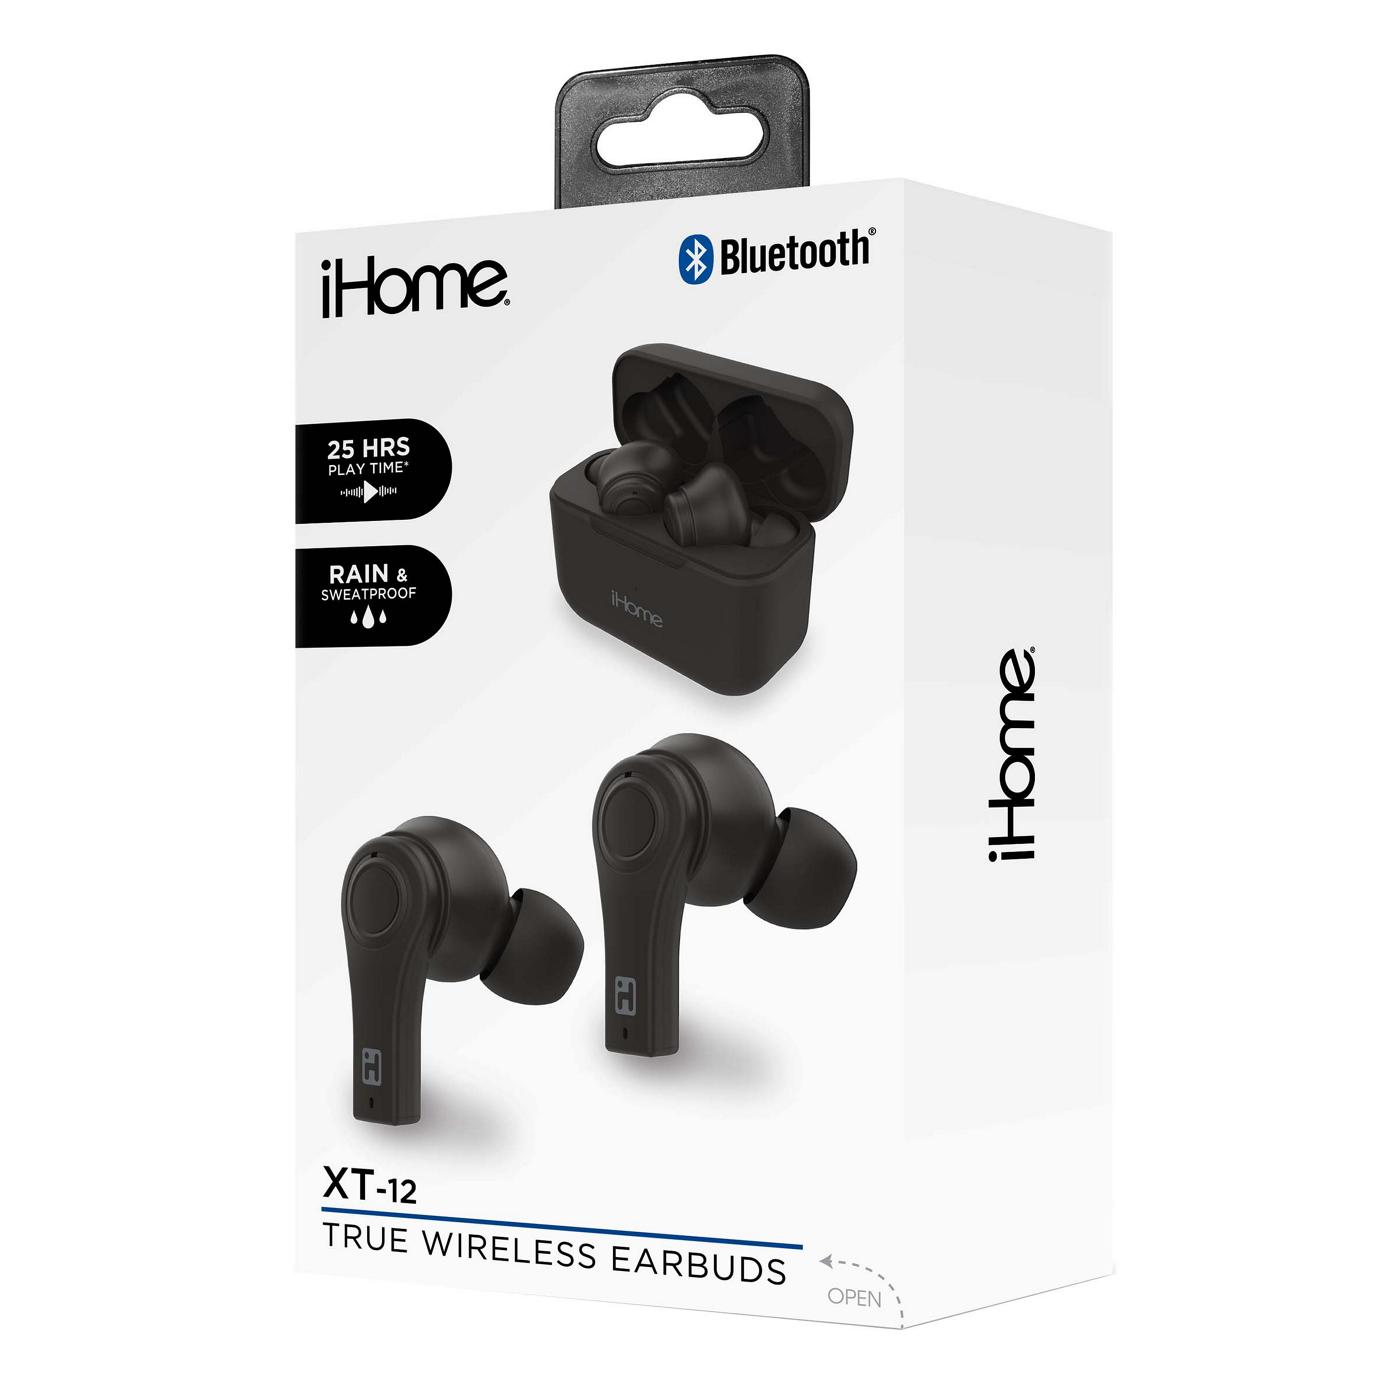 iHome True Wireless XT-12 Earbuds with Charging Case - Black